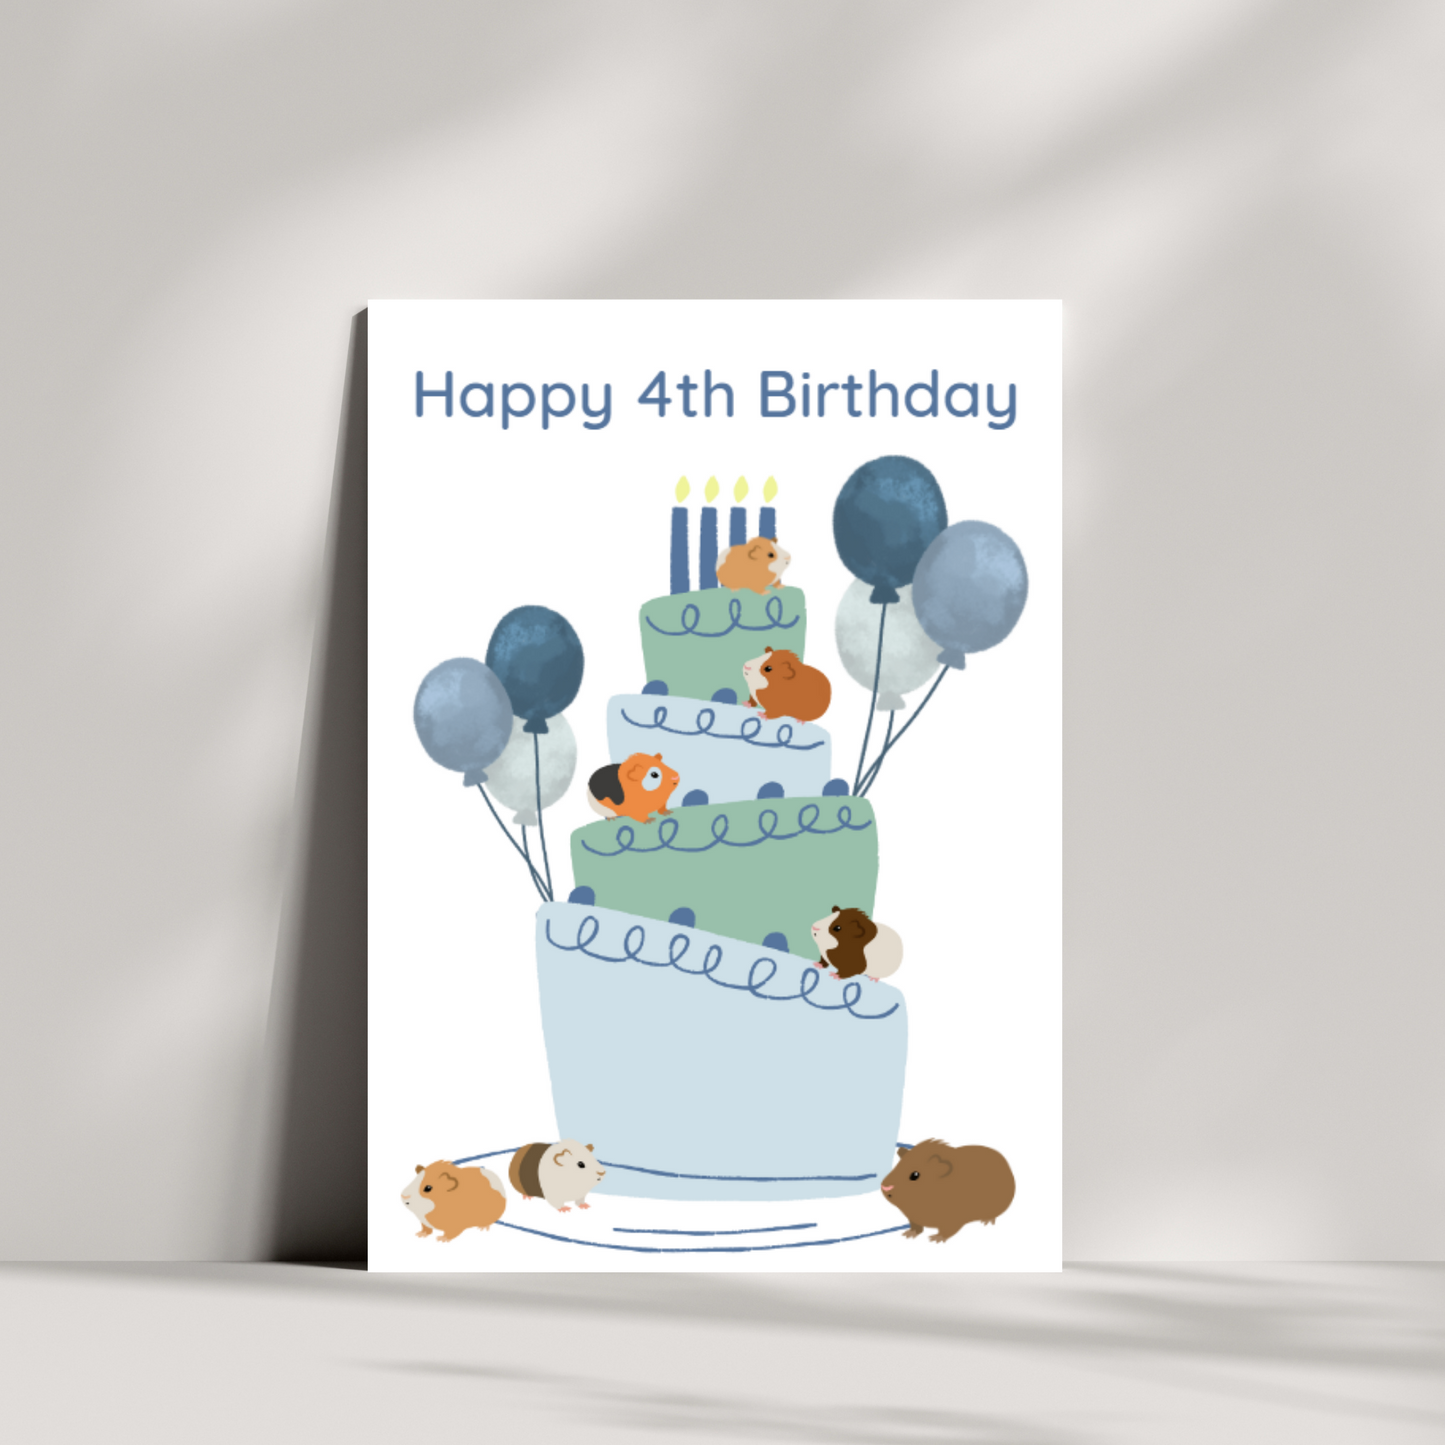 Guinea pigs on a cake - happy 1st/2nd/3rd/4th/5th/6th/7th/8th/9th/10th birthday - guinea pig birthday card